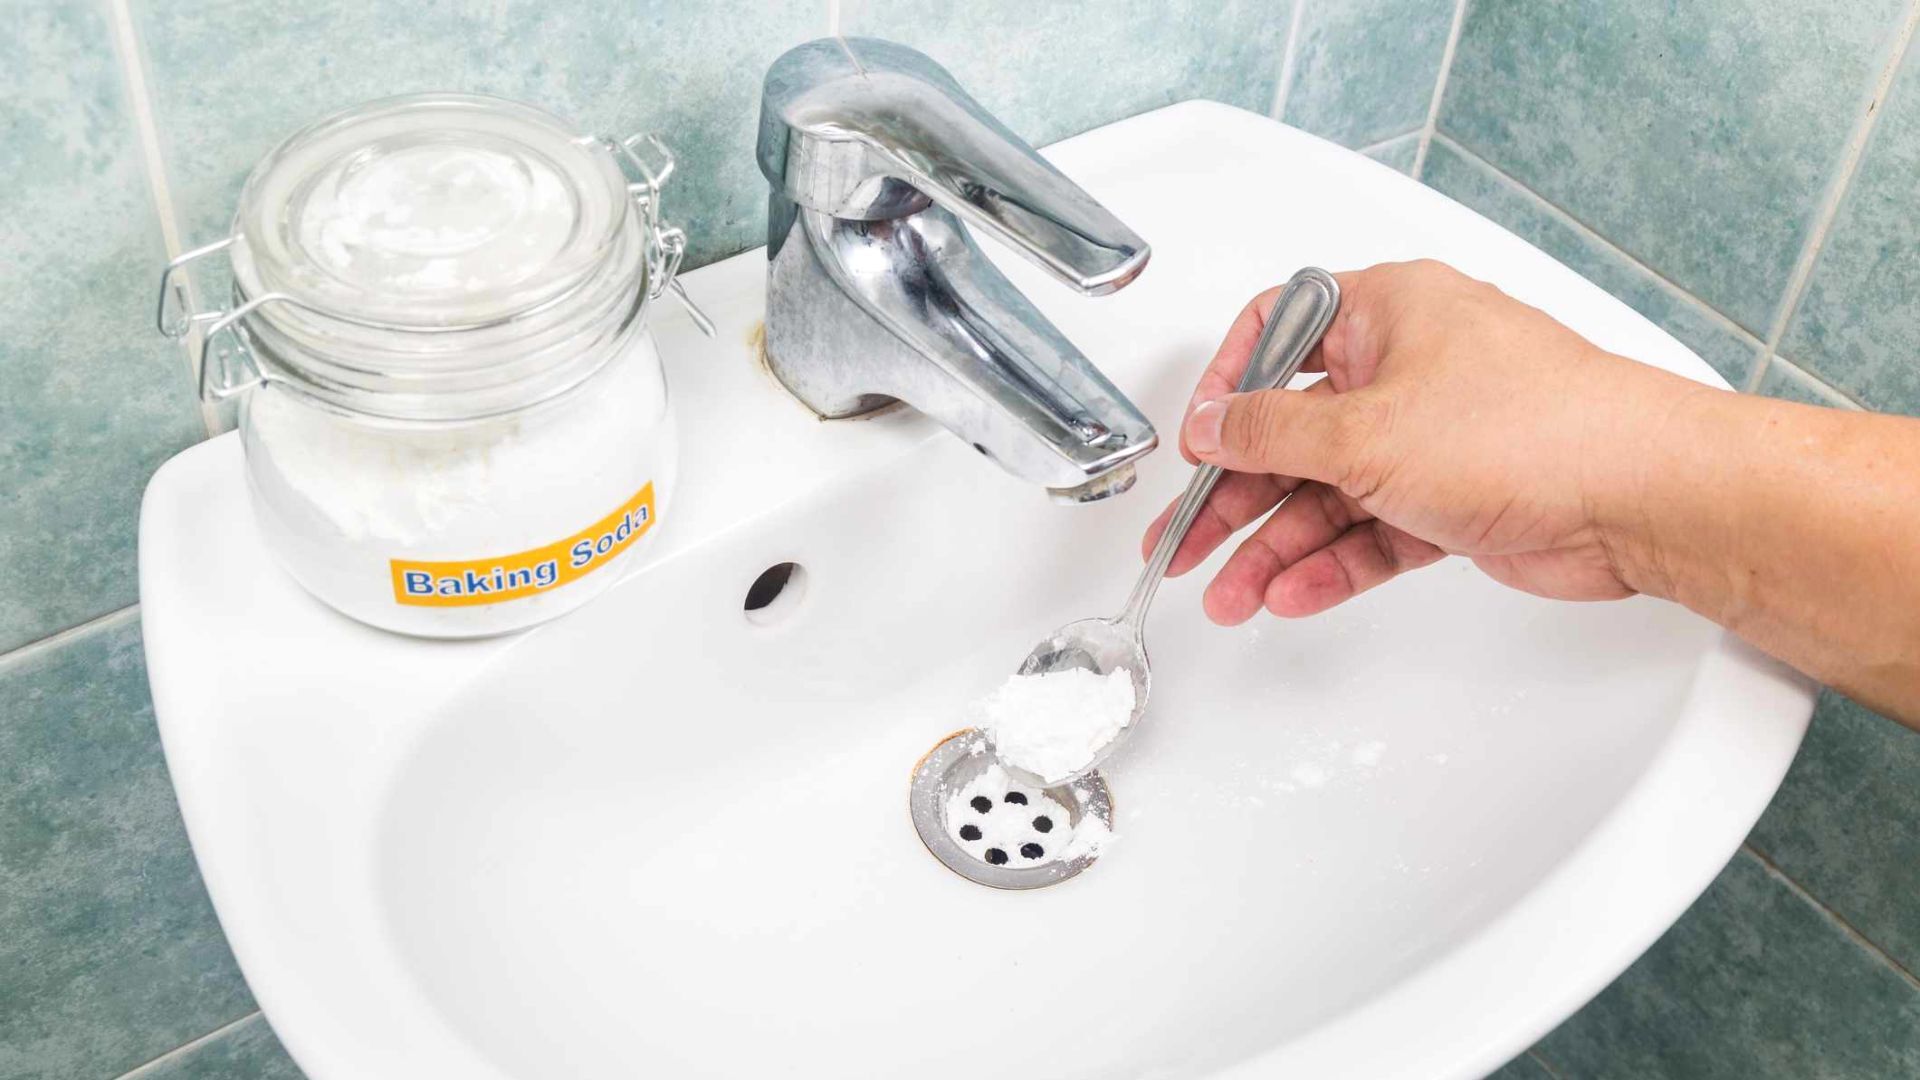 How To Clean A Sink With Baking Soda